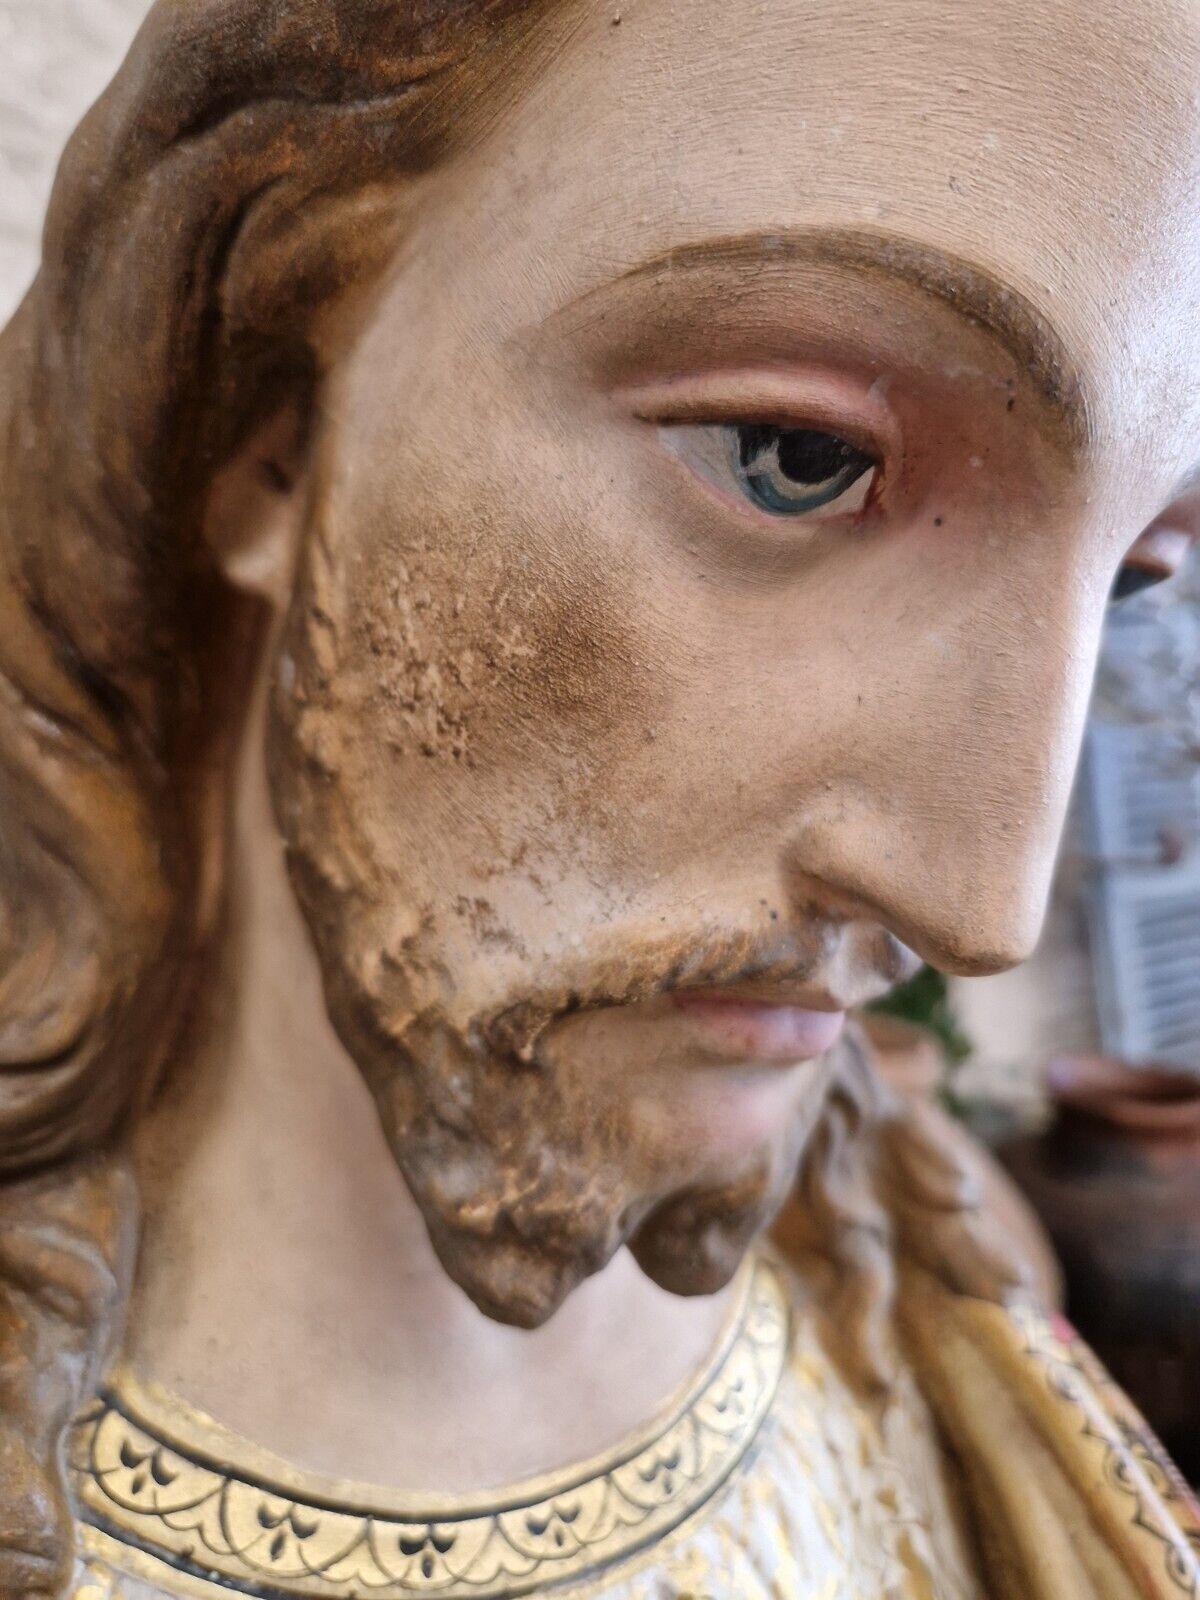 This life-sized sculpture from the 19th century depicts Jesus the Sacred Heart in stunning realism. The piece is hand-carved from plaster with intricate details that capture the essence of the subject. The statue stands at an impressive 155cm tall,